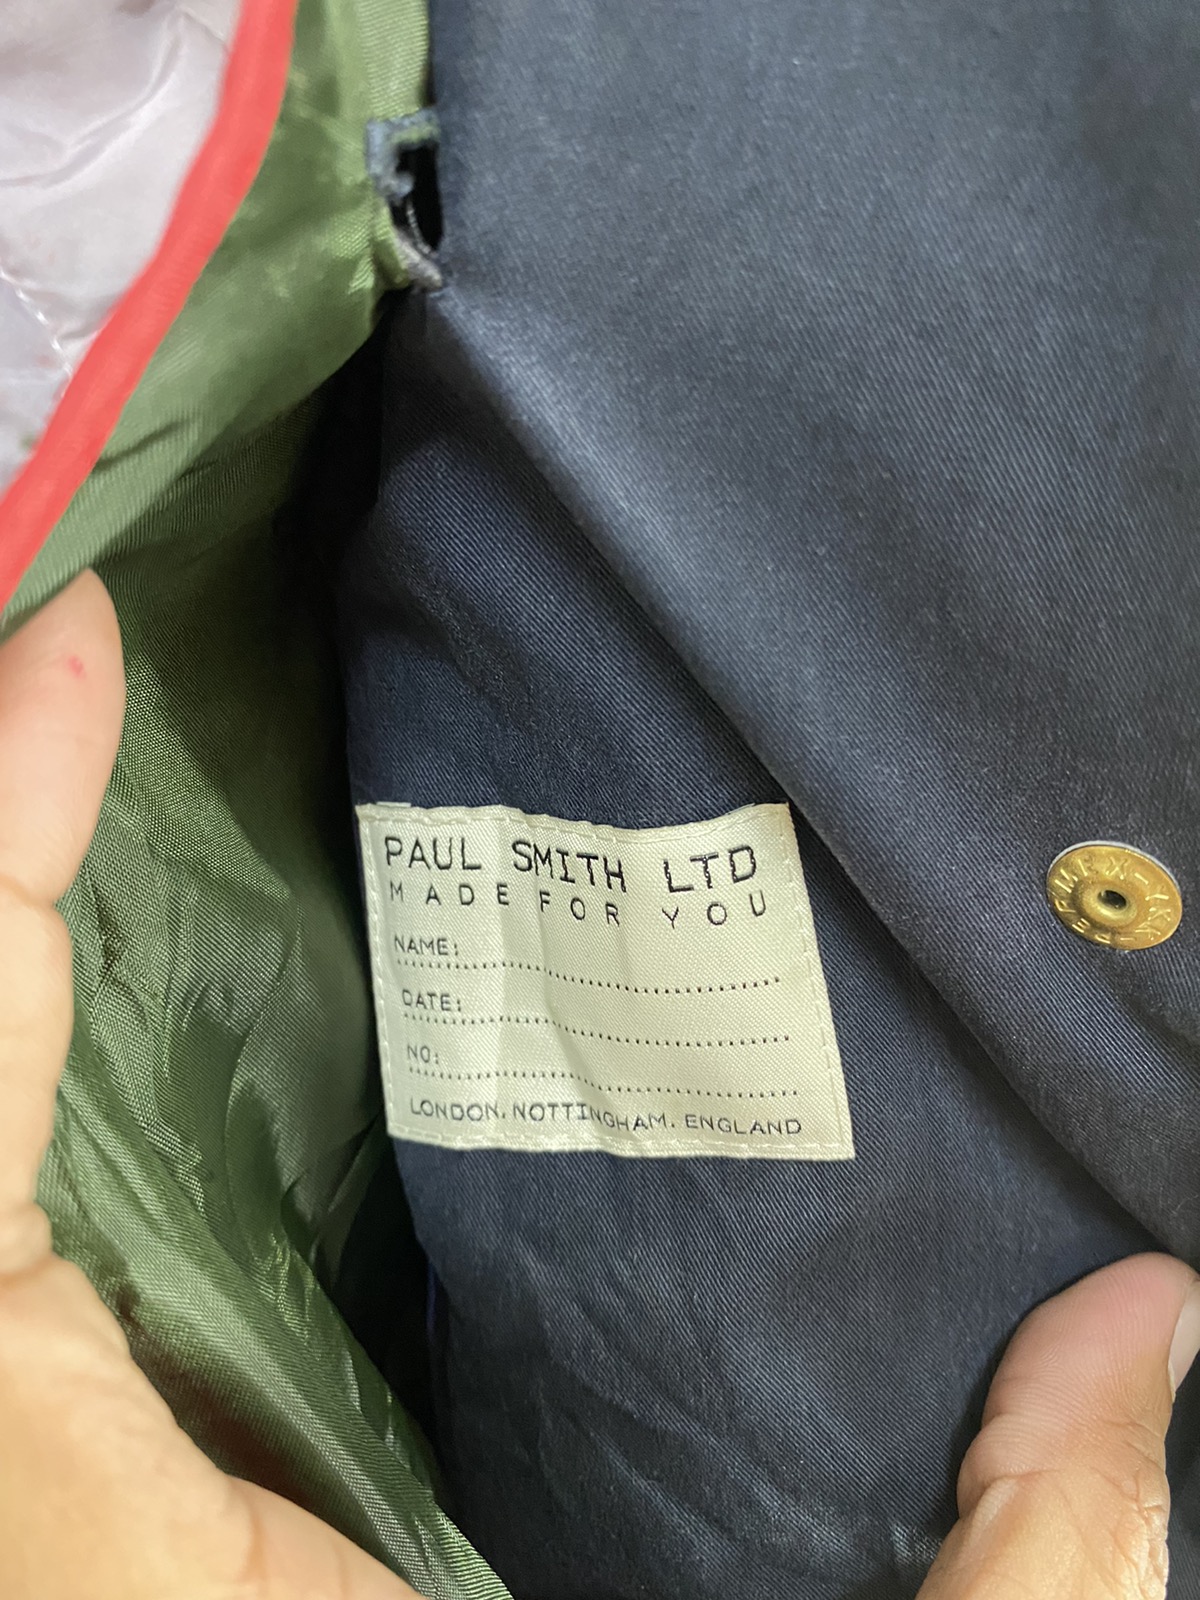 Paul Smith Parka Floral Lining Nice Design With Hoodies - 11